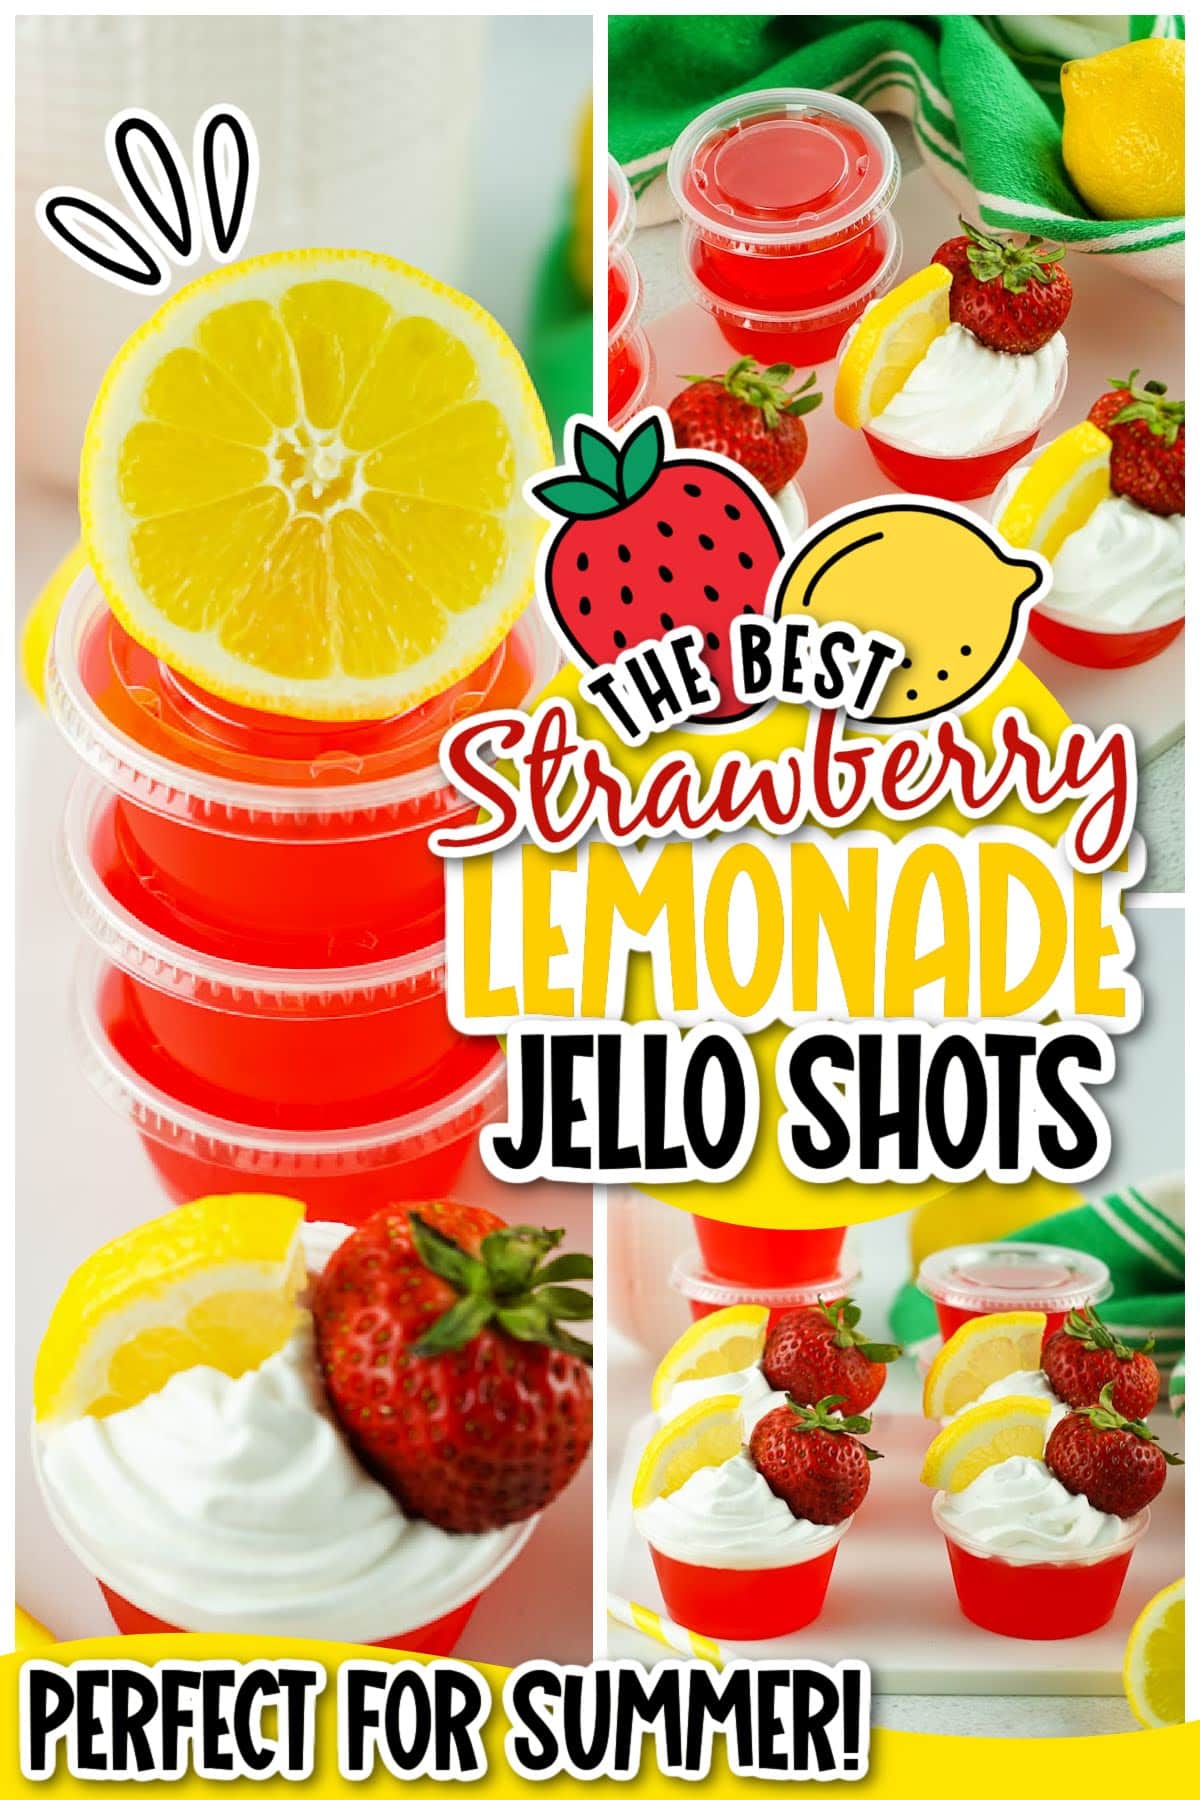 Three image collage of Strawberry Lemonade Jello Shots with text overlay.